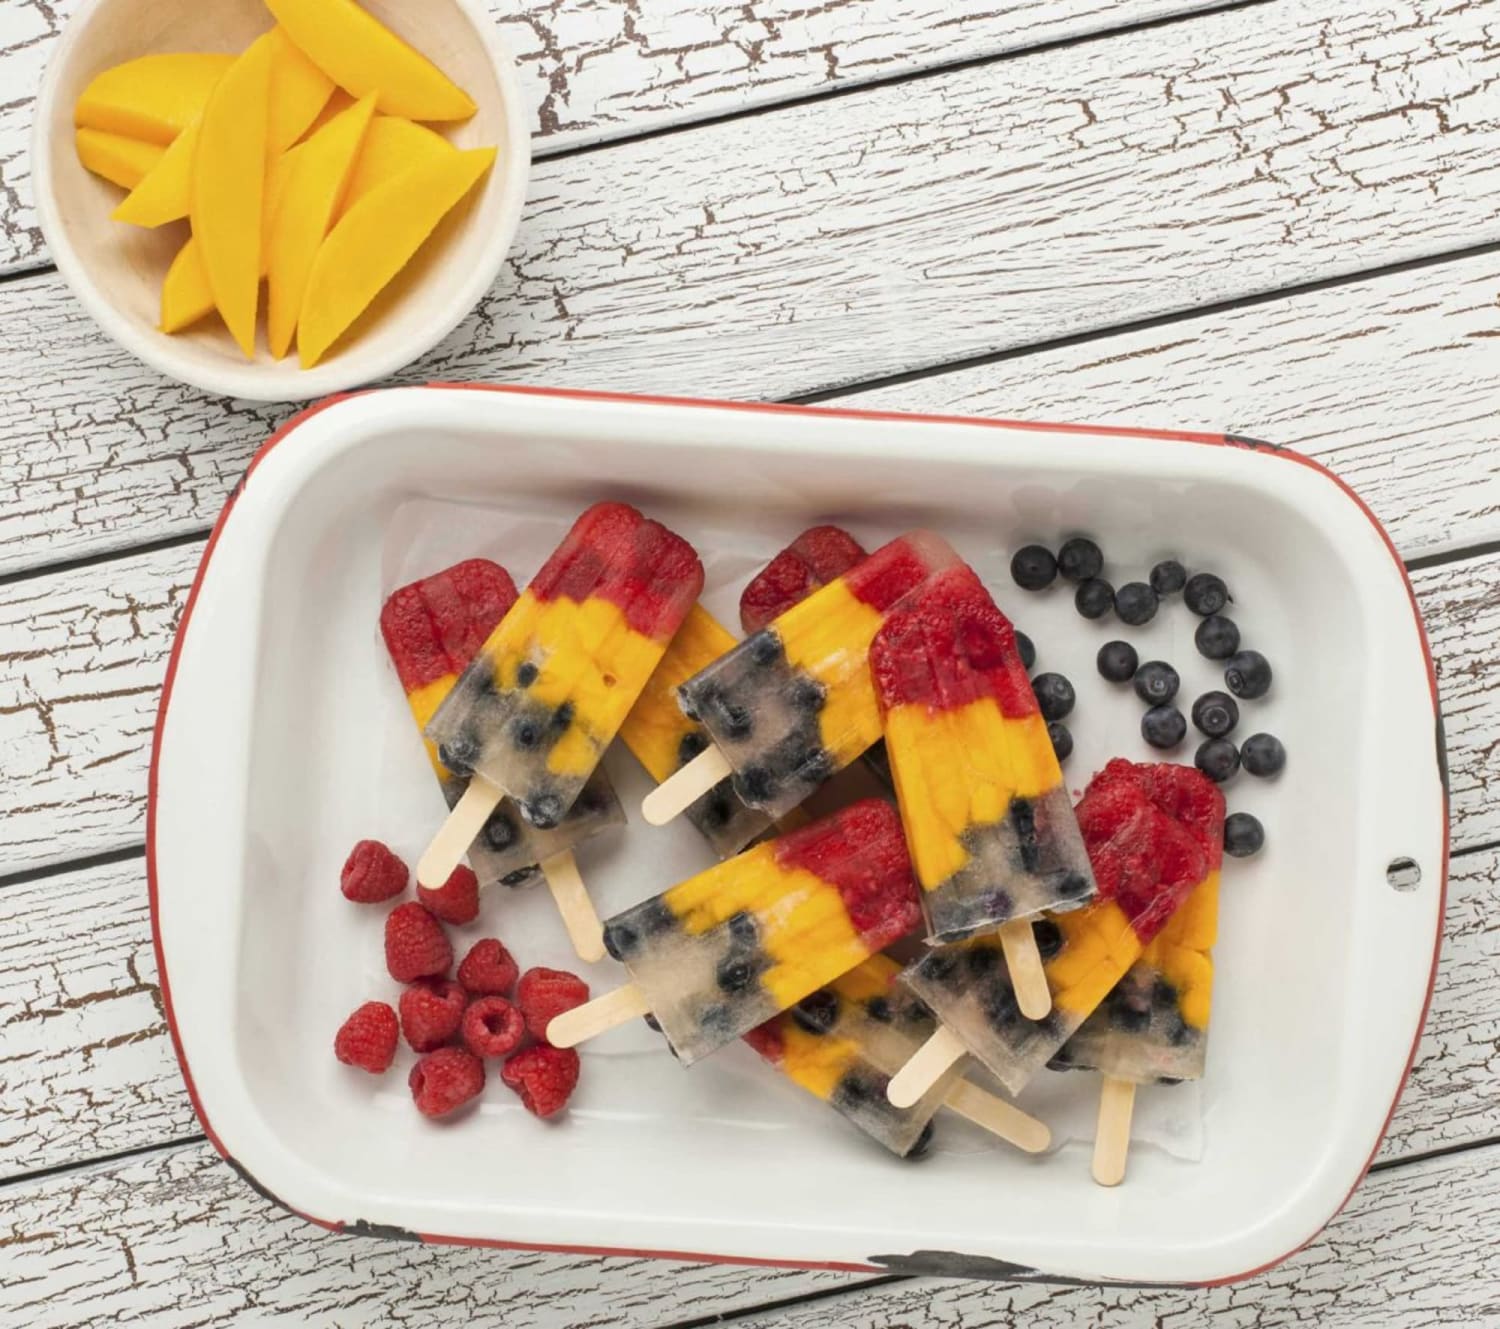 Easy fruit popsicle recipes that the whole family will love